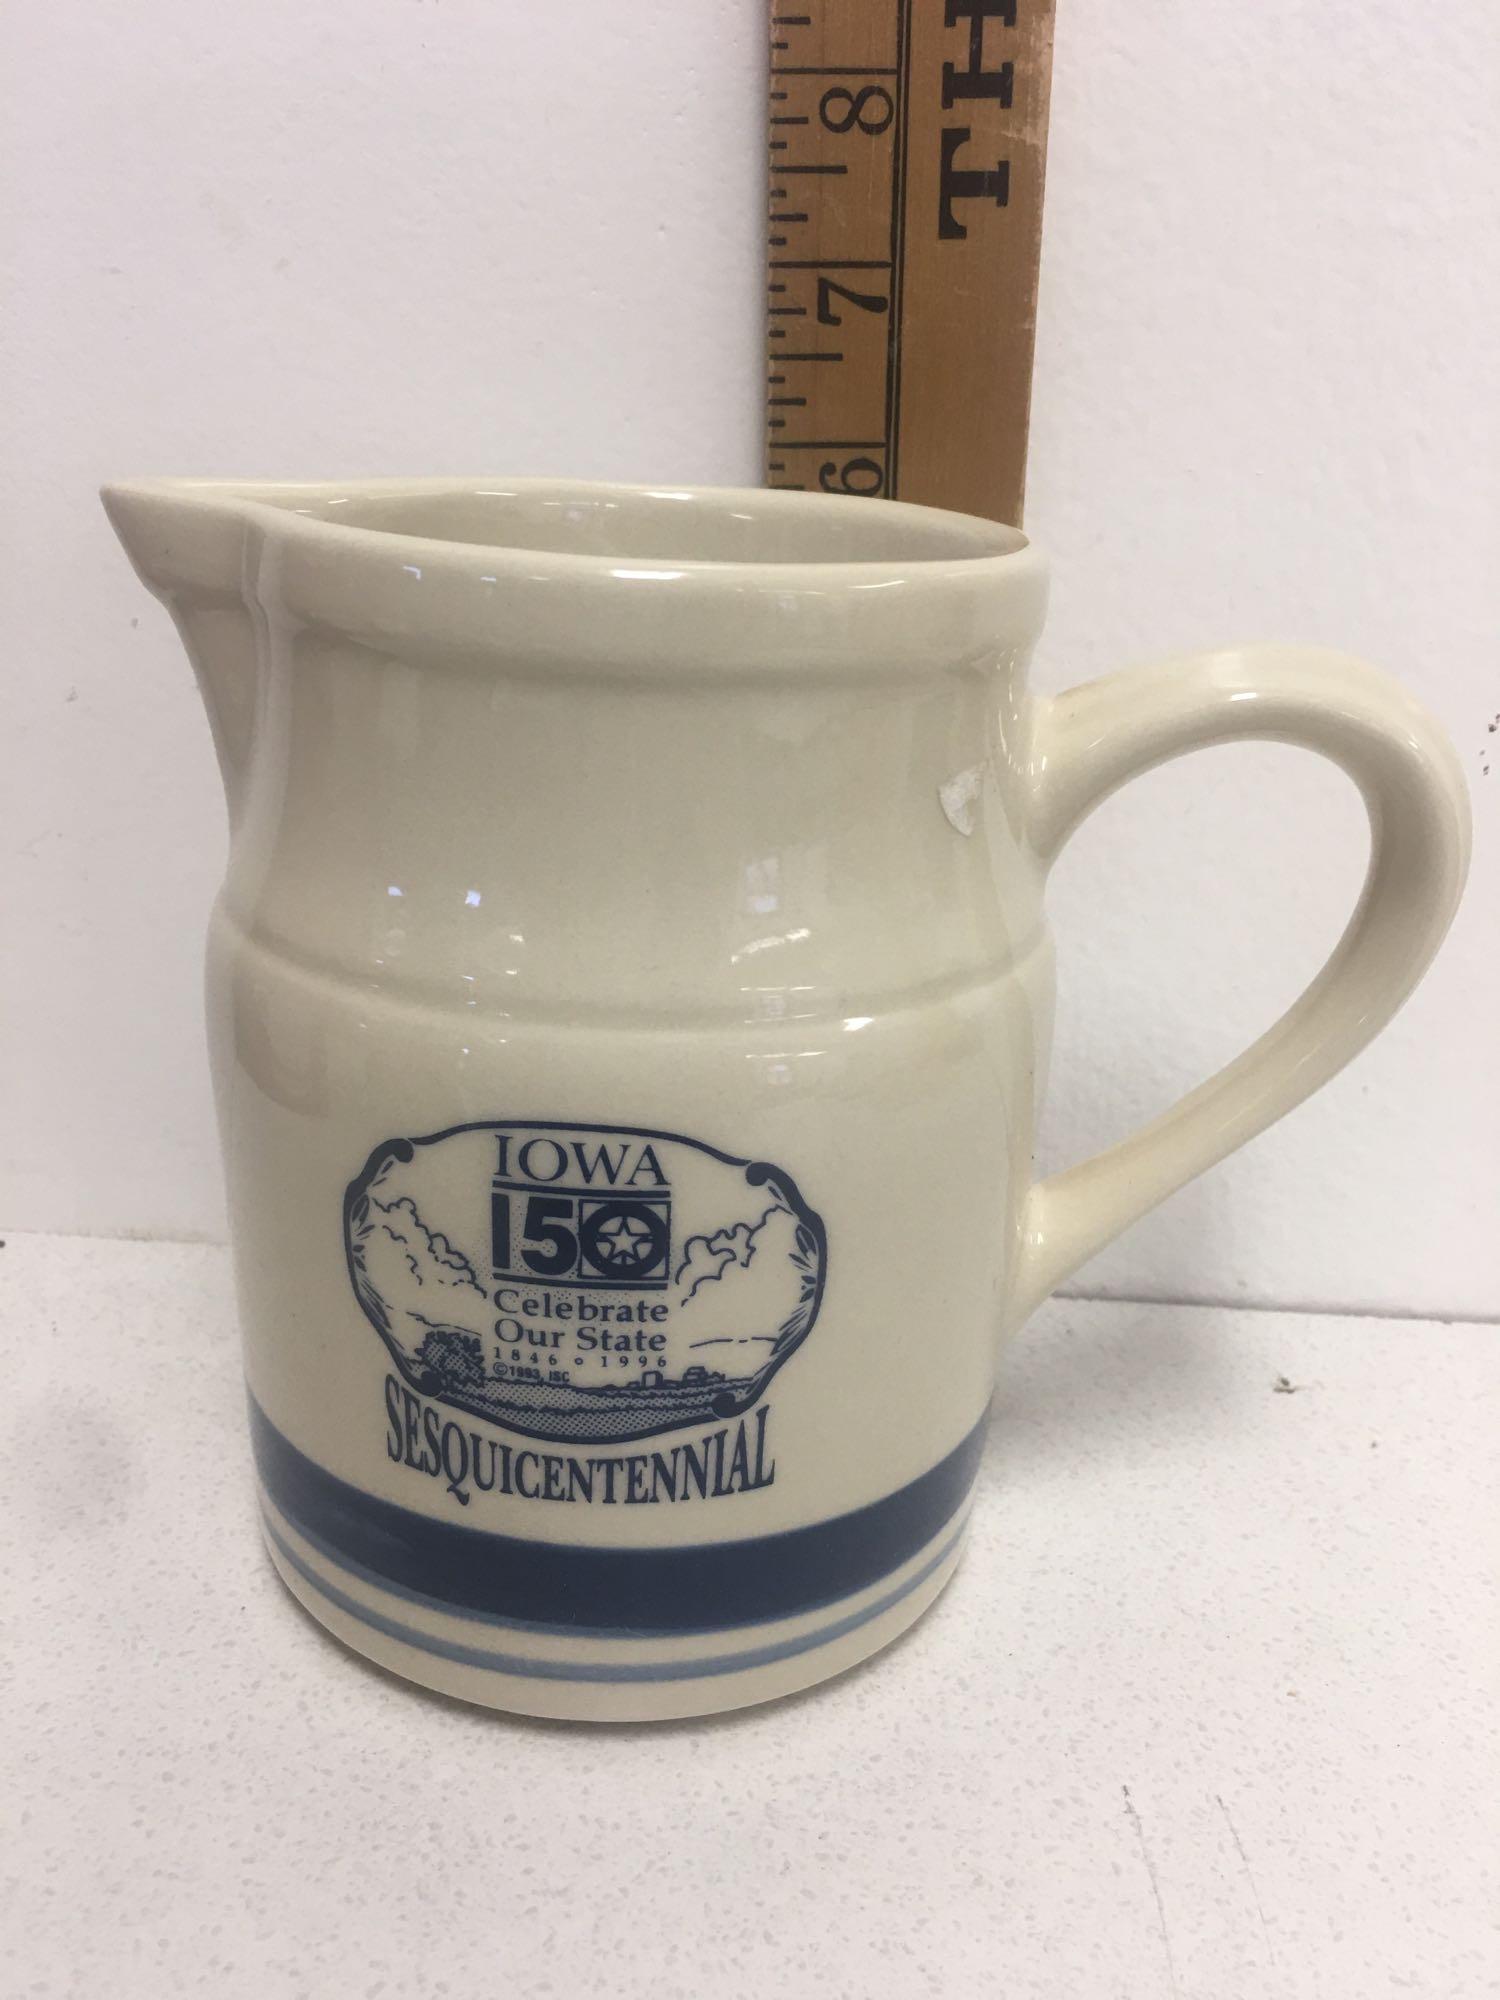 Maple City Pottery and Friendship Pottery 1 quart pitcher , ?Iowa 150 Celebrate our state 1993?